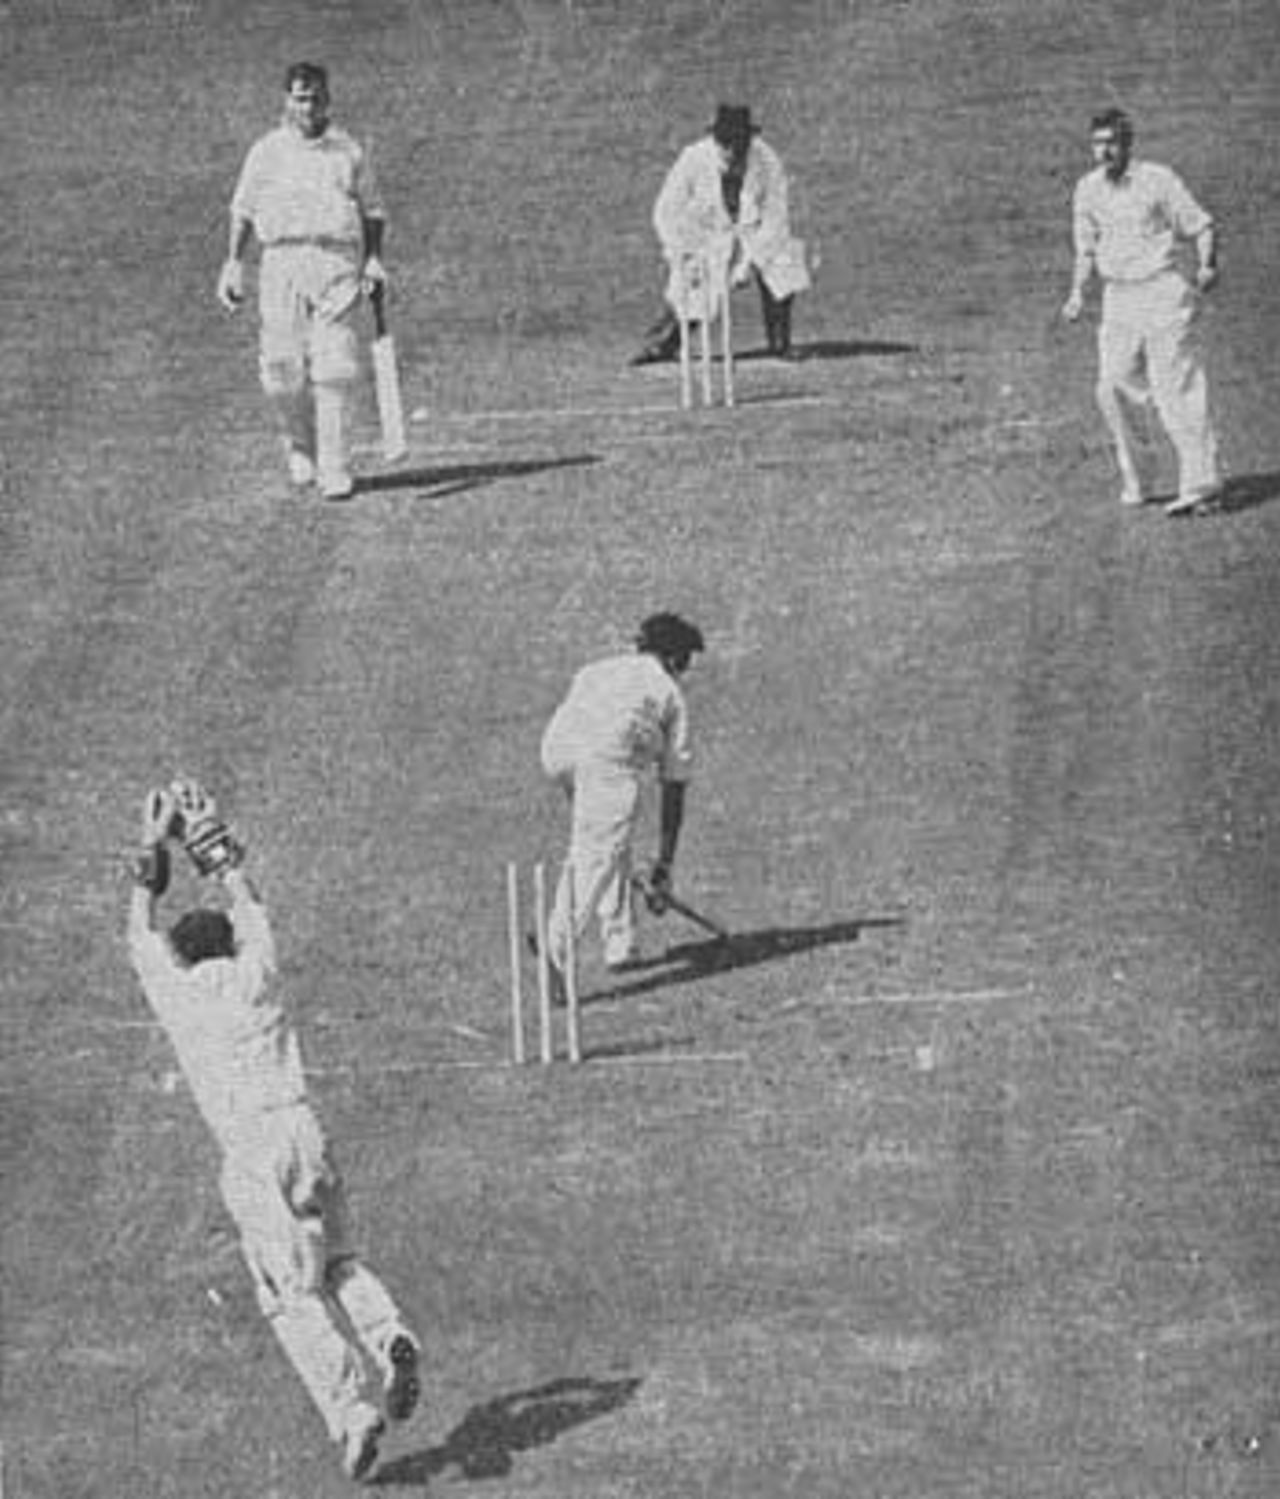 Trevor Bailey is bowled by Ron Archer, England v Australia, The Oval, August 17, 1953